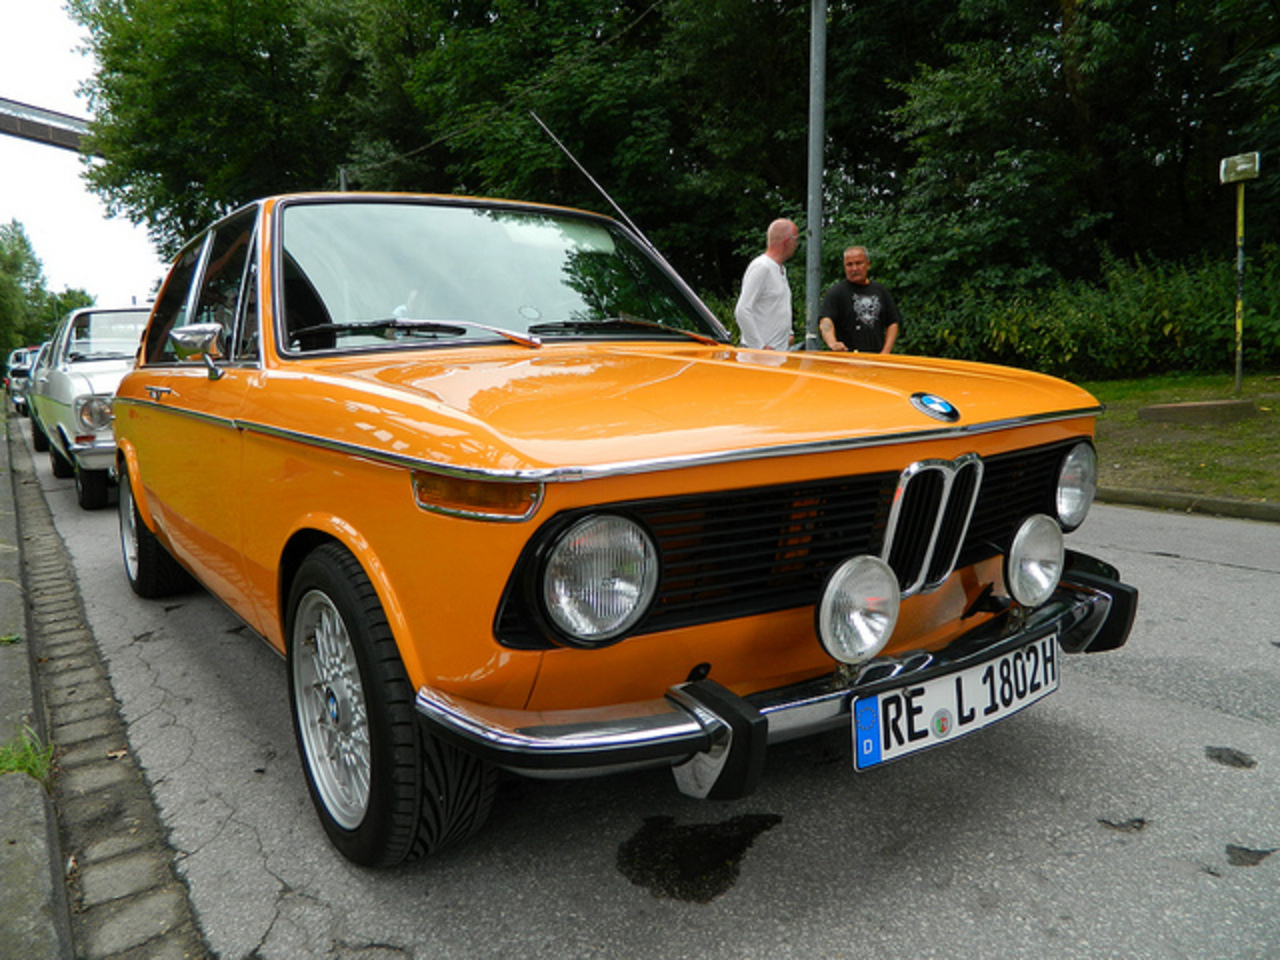 BMW 1802 touring | Flickr - Photo Sharing!